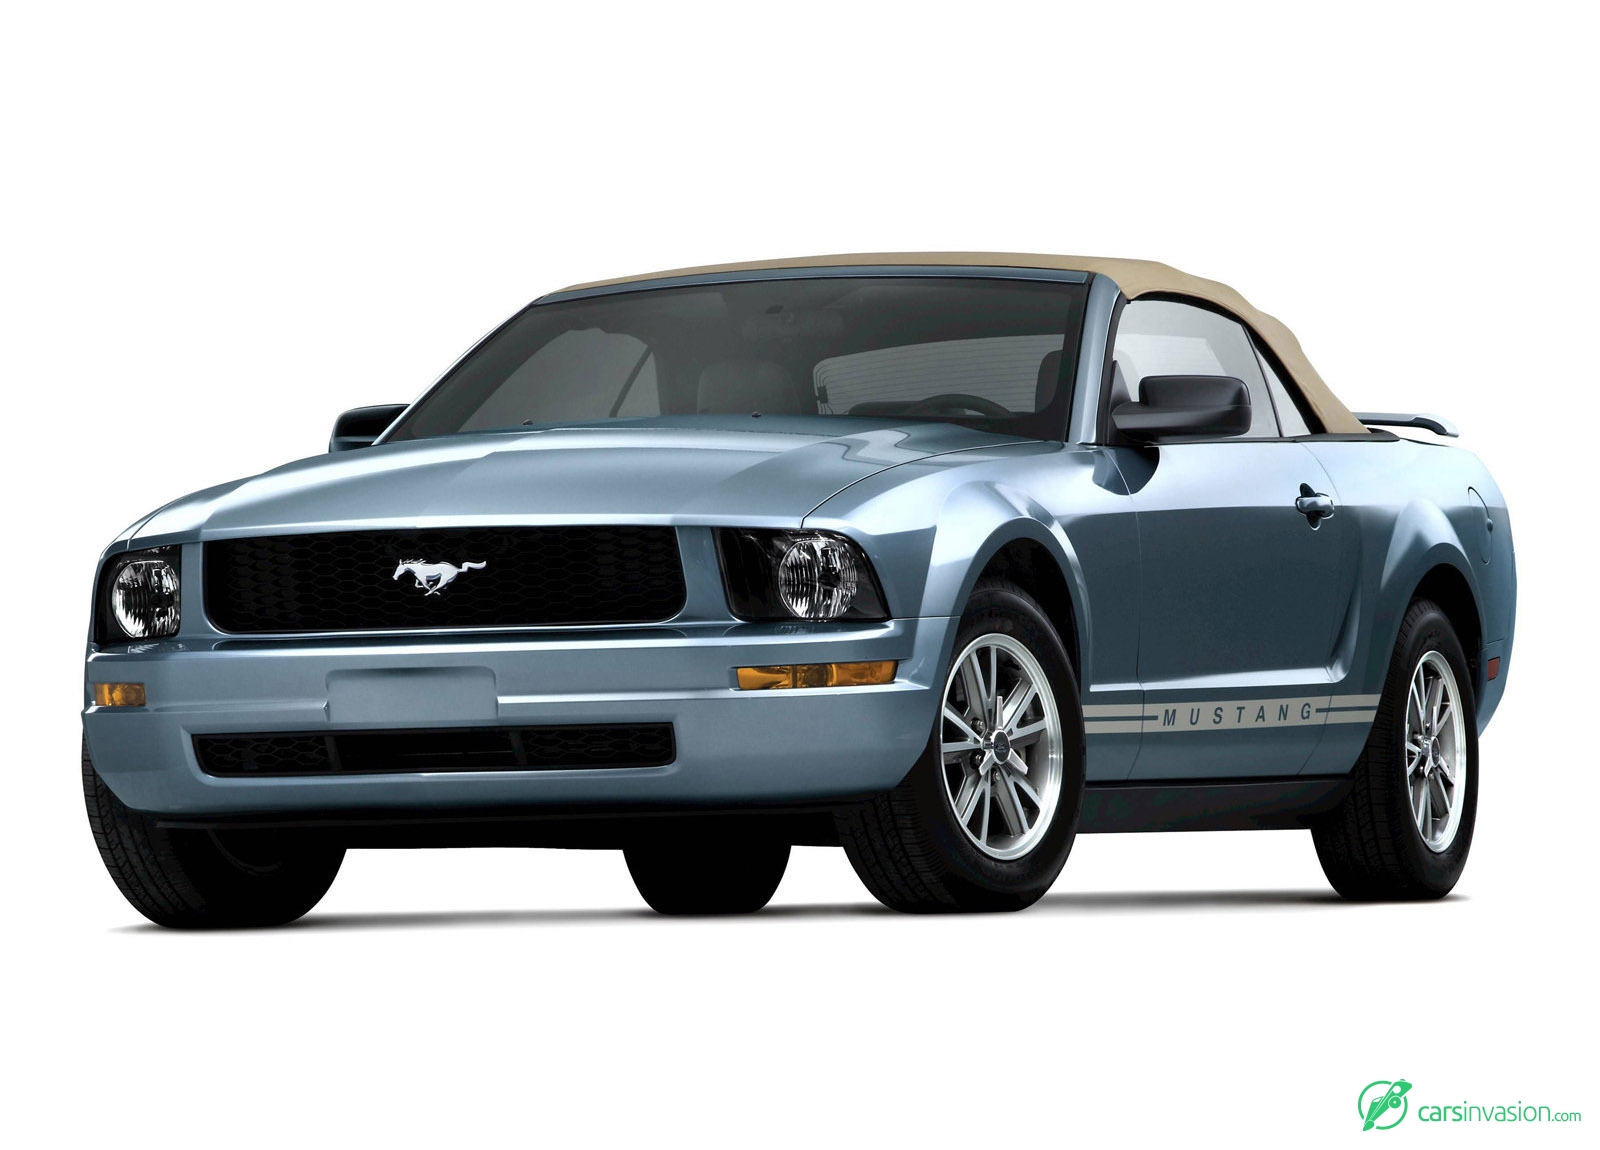 2005 Ford Mustang Convertible  HD Pictures @ carsinvasion.com